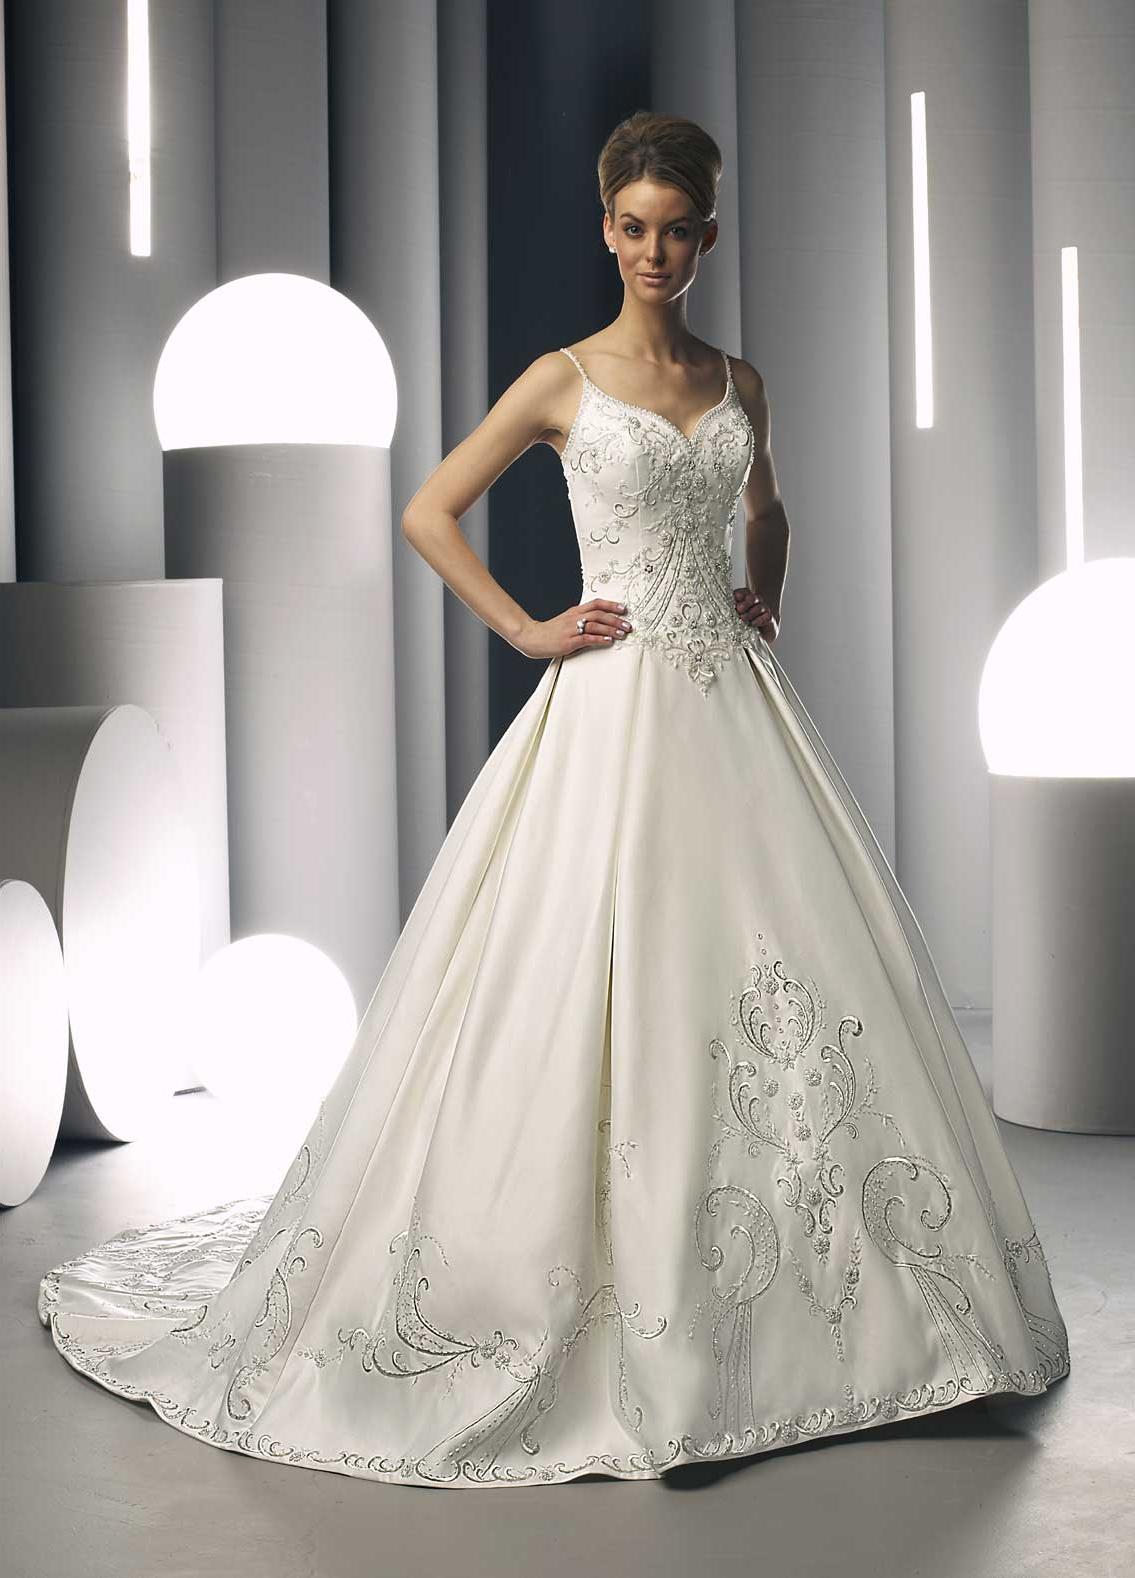 Strapless wedding dresses with